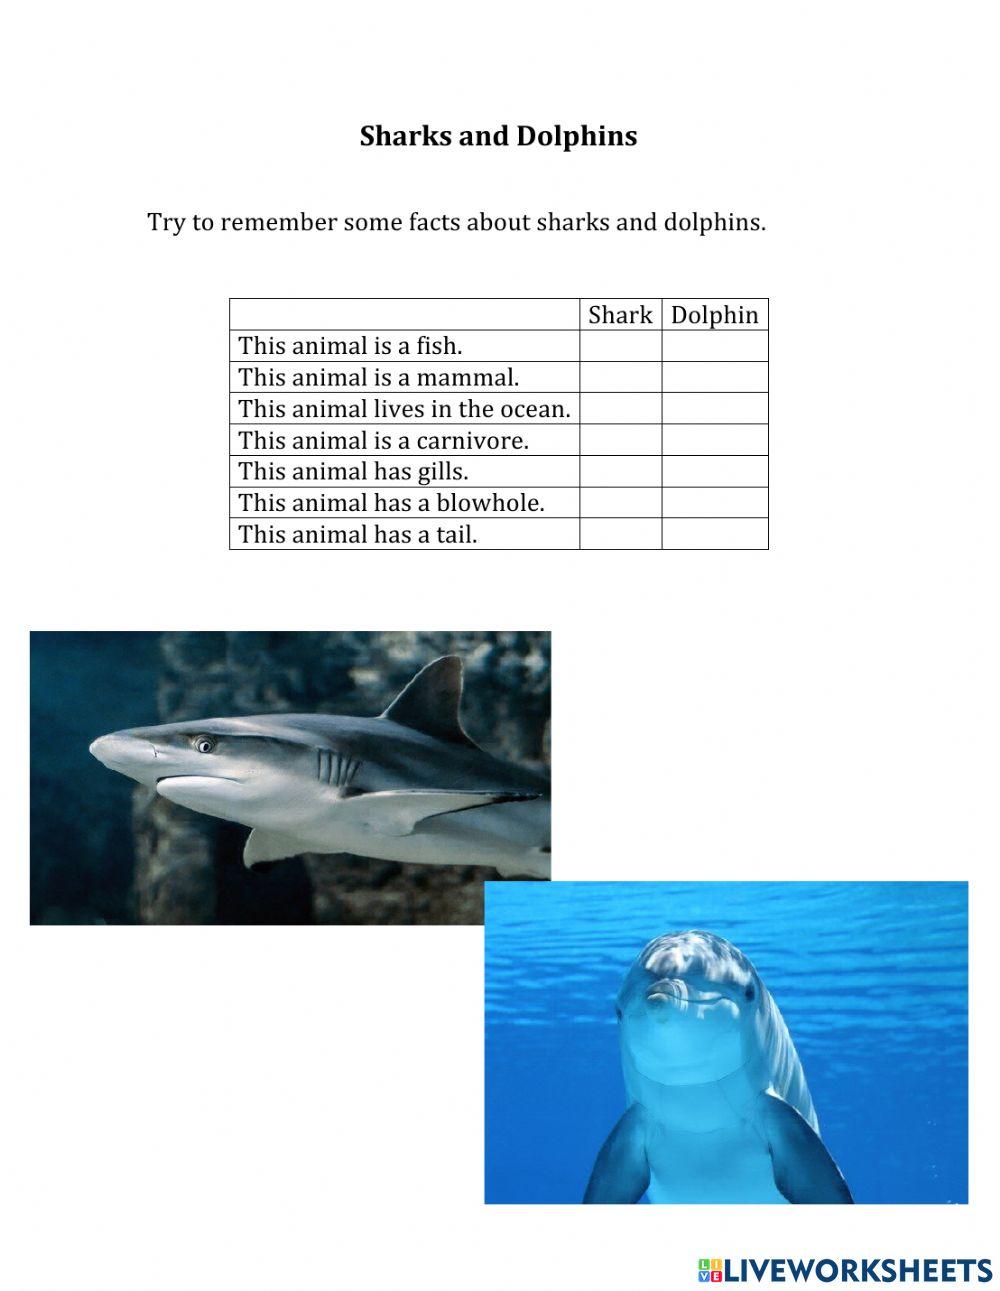 Sharks and Dolphins